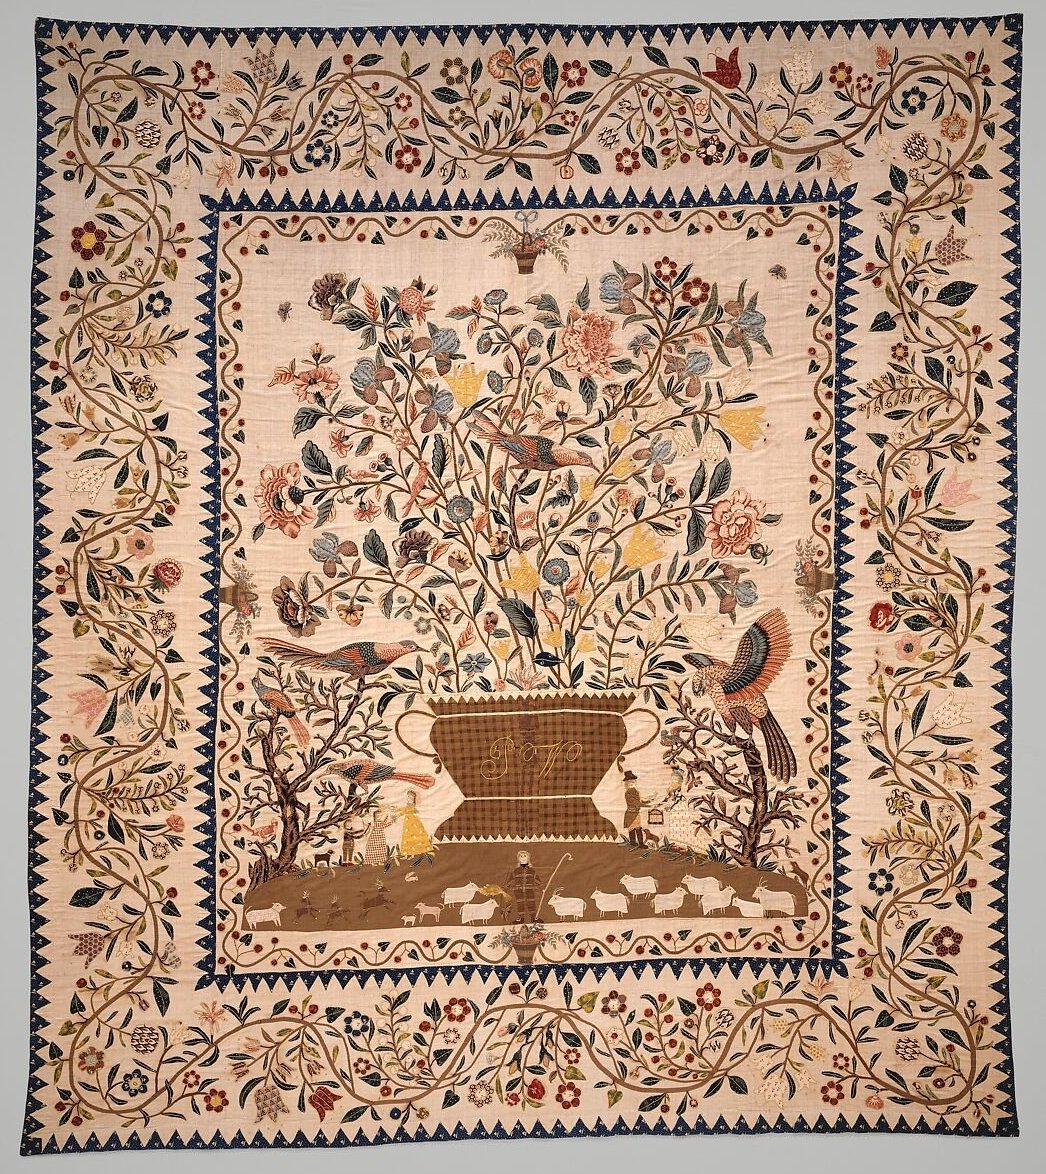 Quilt made by probably by Sarah Furman Warner Williams, 1803